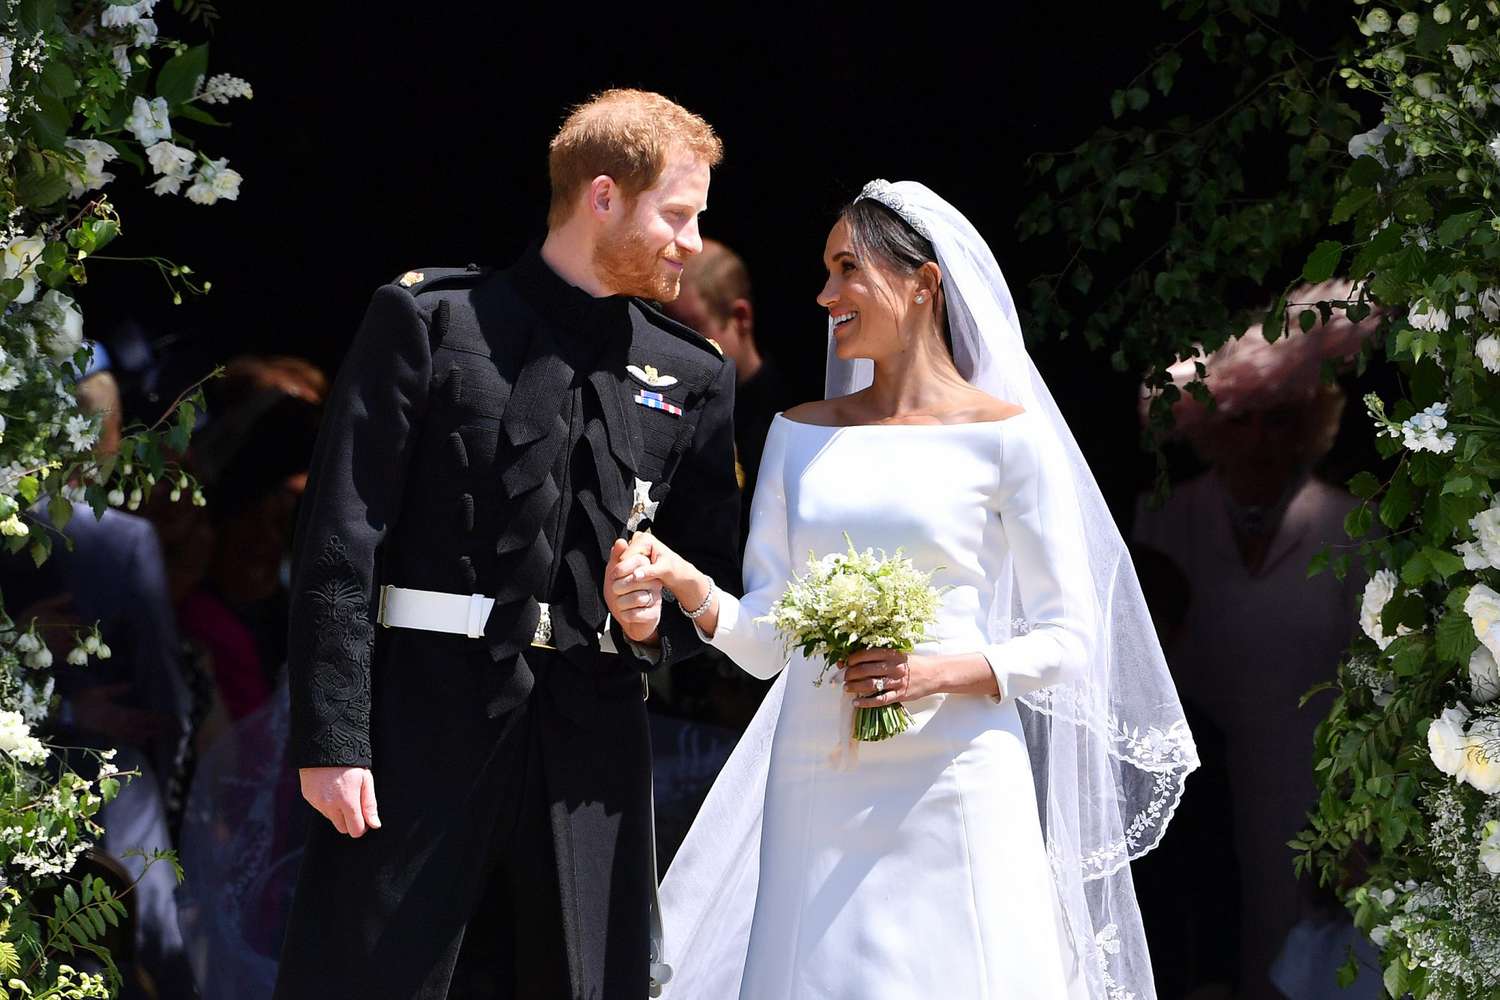 What's Meghan and Harry's Real Anniversary?